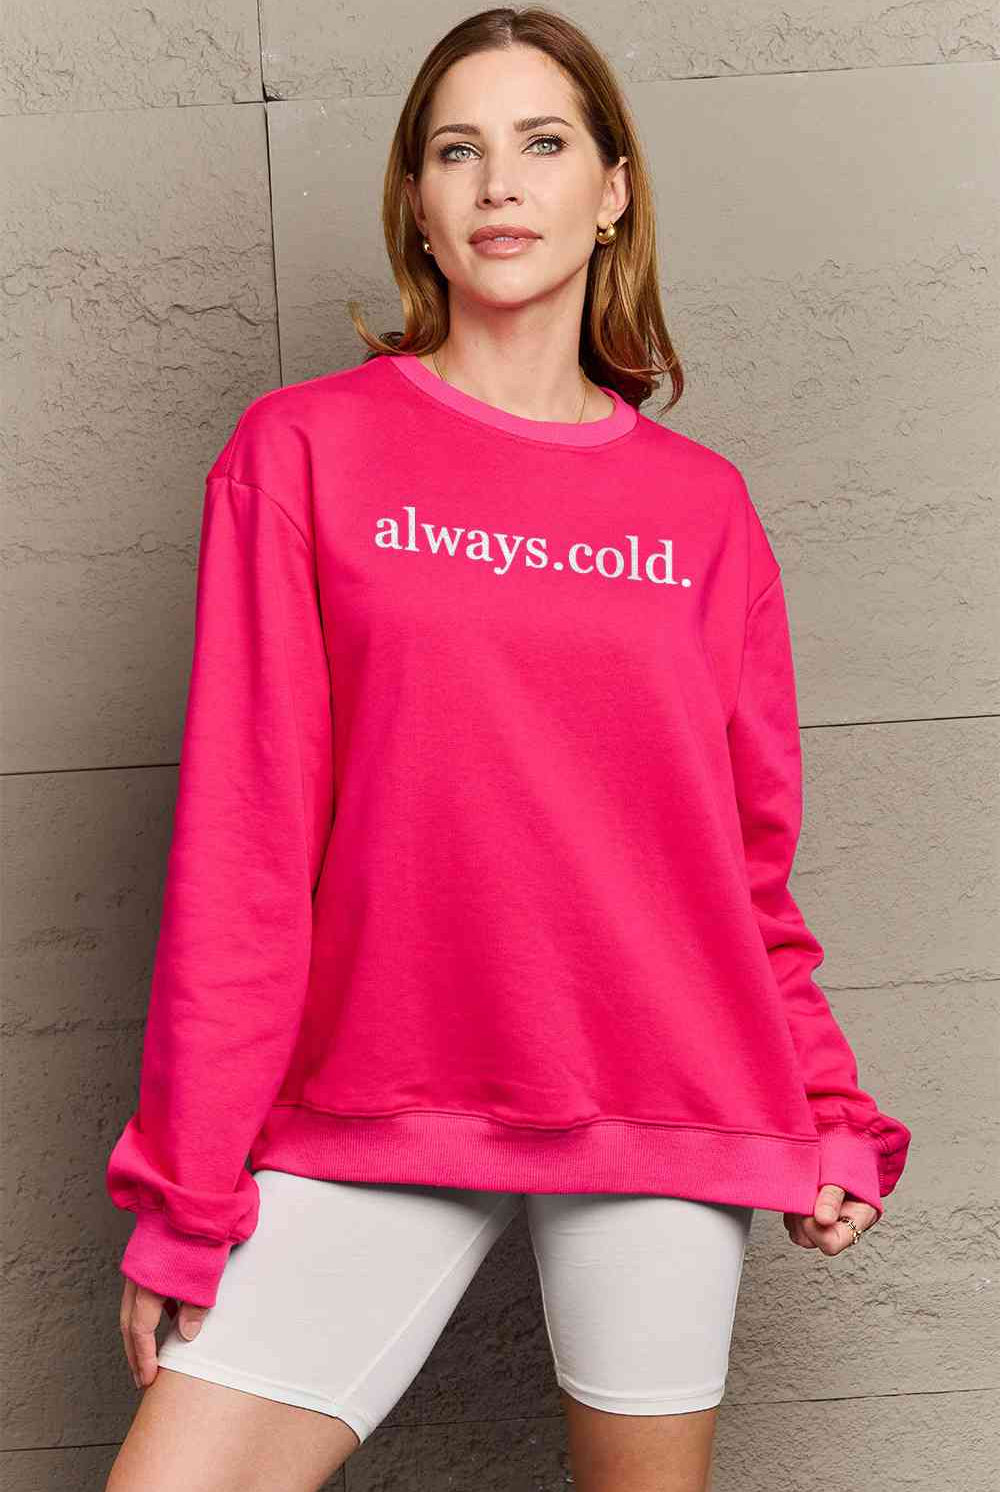 Simply Love Full Size ALWAYS.COLD. Graphic Sweatshirt - GemThreads Boutique